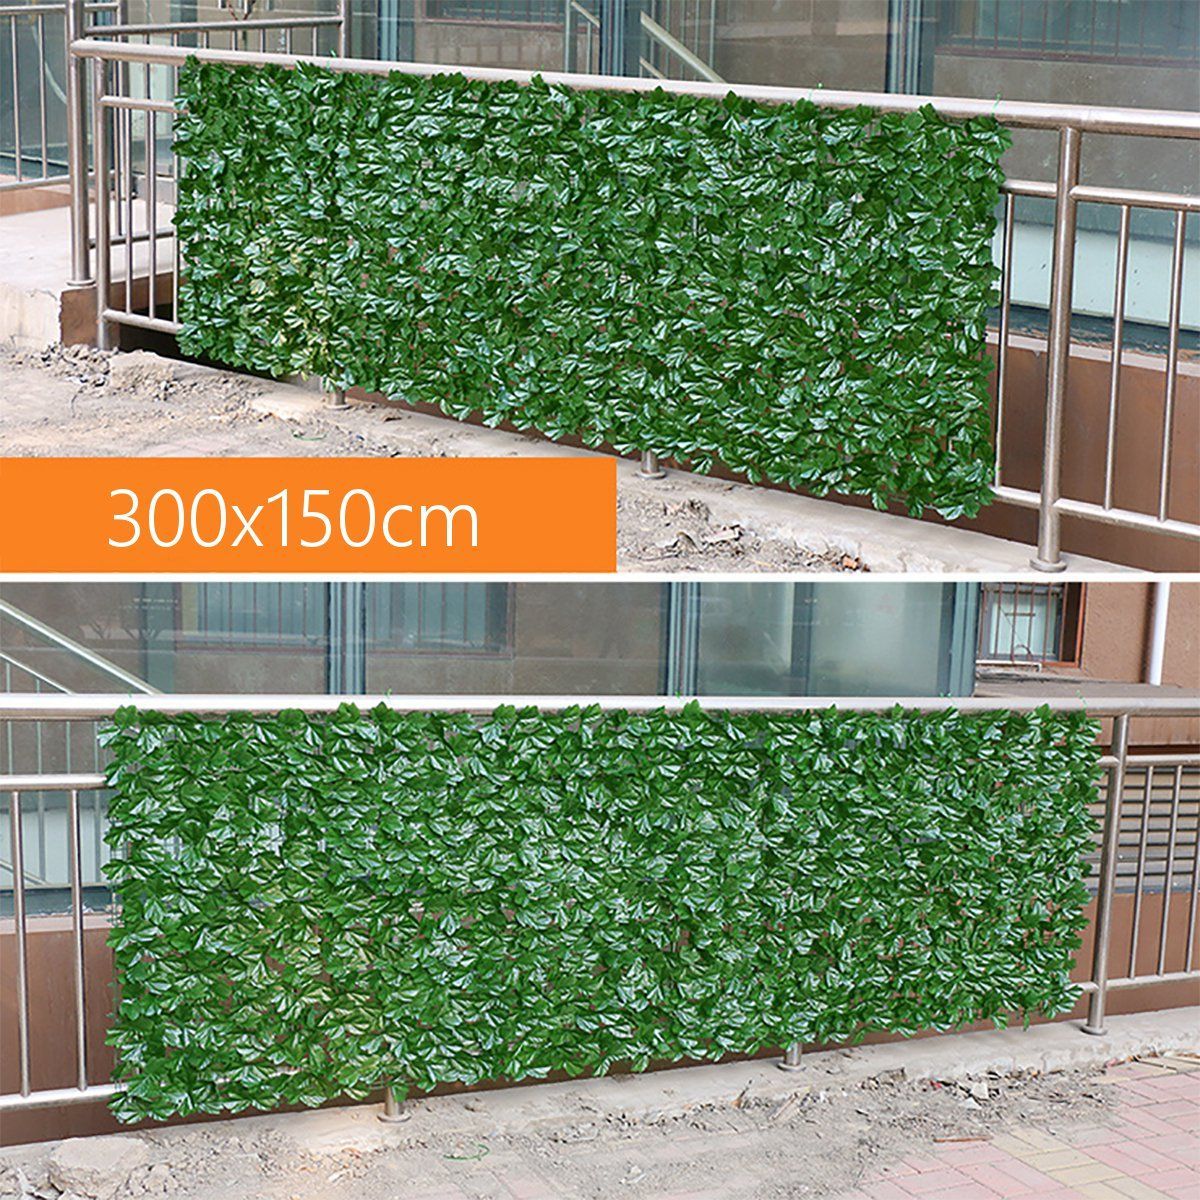 150x300cm-Screen-Artificial-Faux-Ivy-Leaves-Wall-Garden-Fence-Outdoor-Home-Decorations-1587810